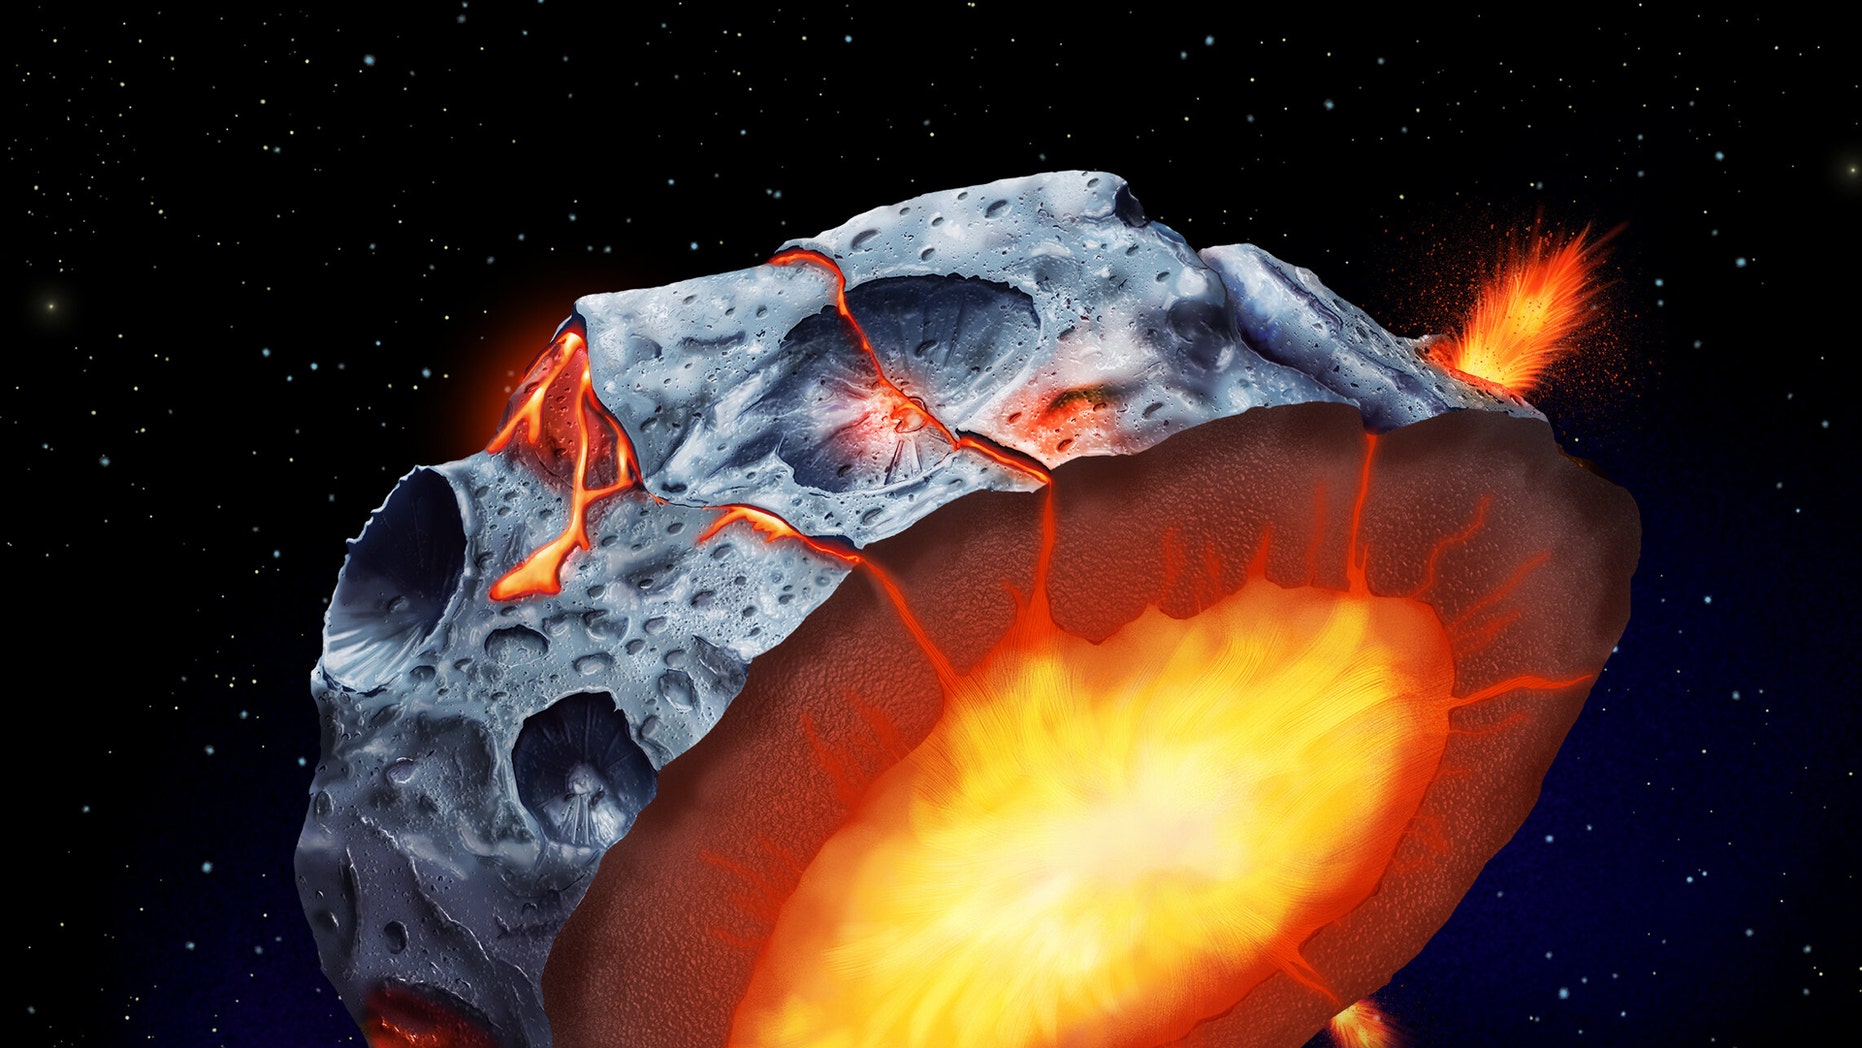 Iron volcanoes may have erupted on metal asteroids, study says | Fox News